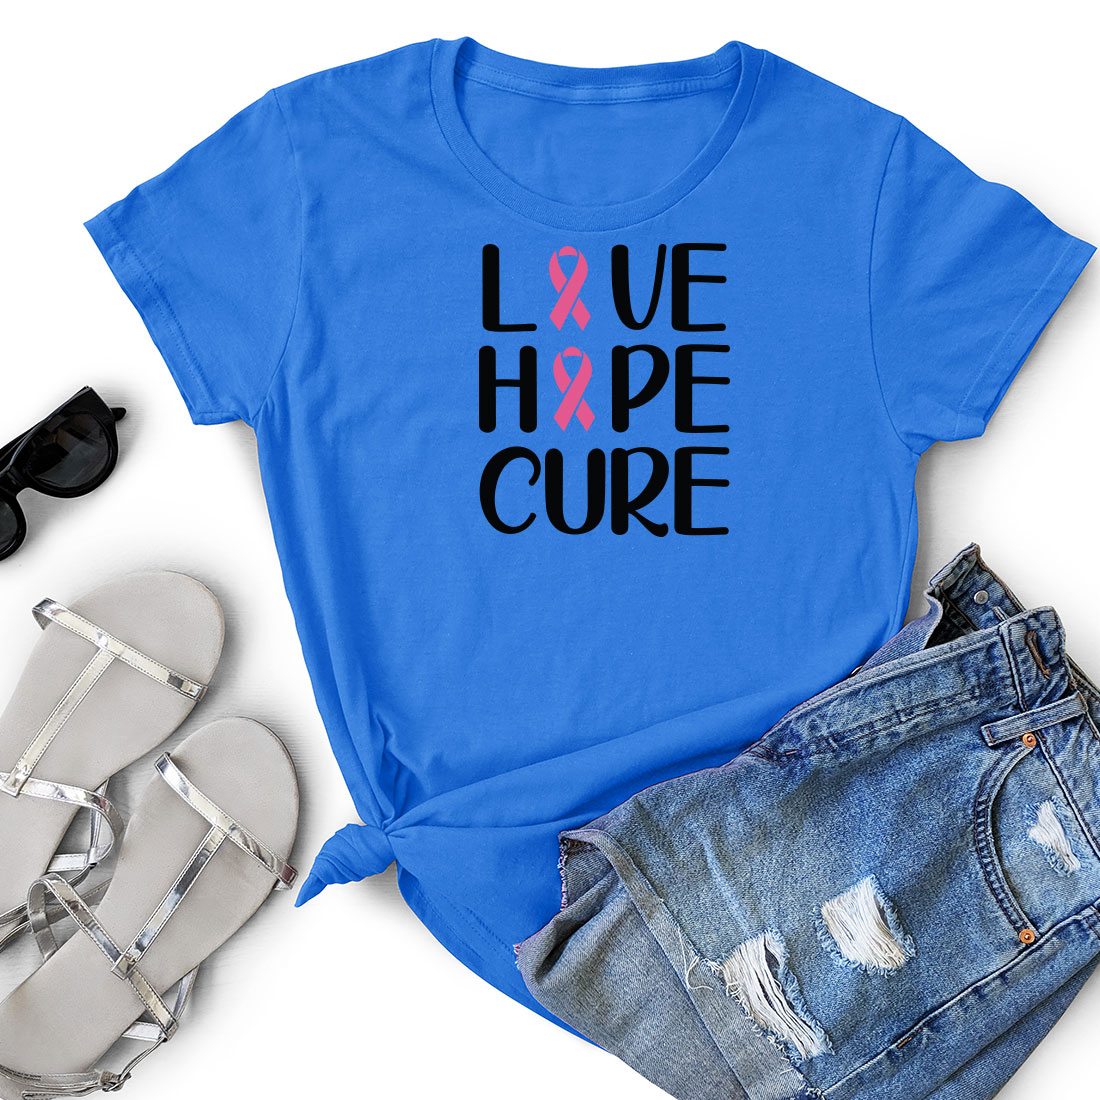 T - shirt that says i love hope and a pair of shorts.